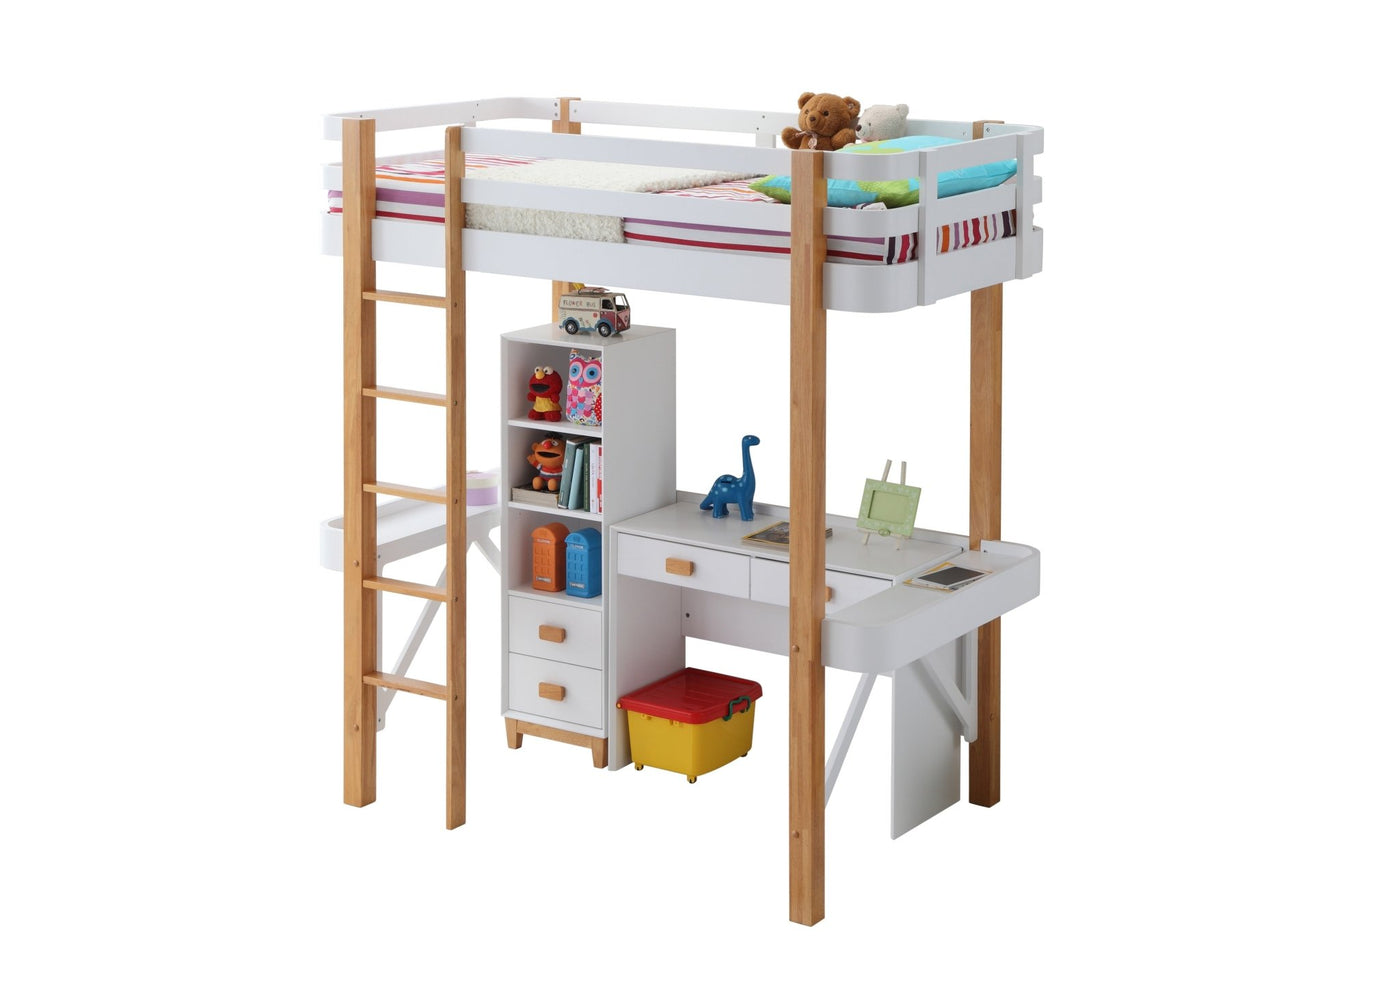 Rutherford Twin Loft Bed with Bookshelf and Desk